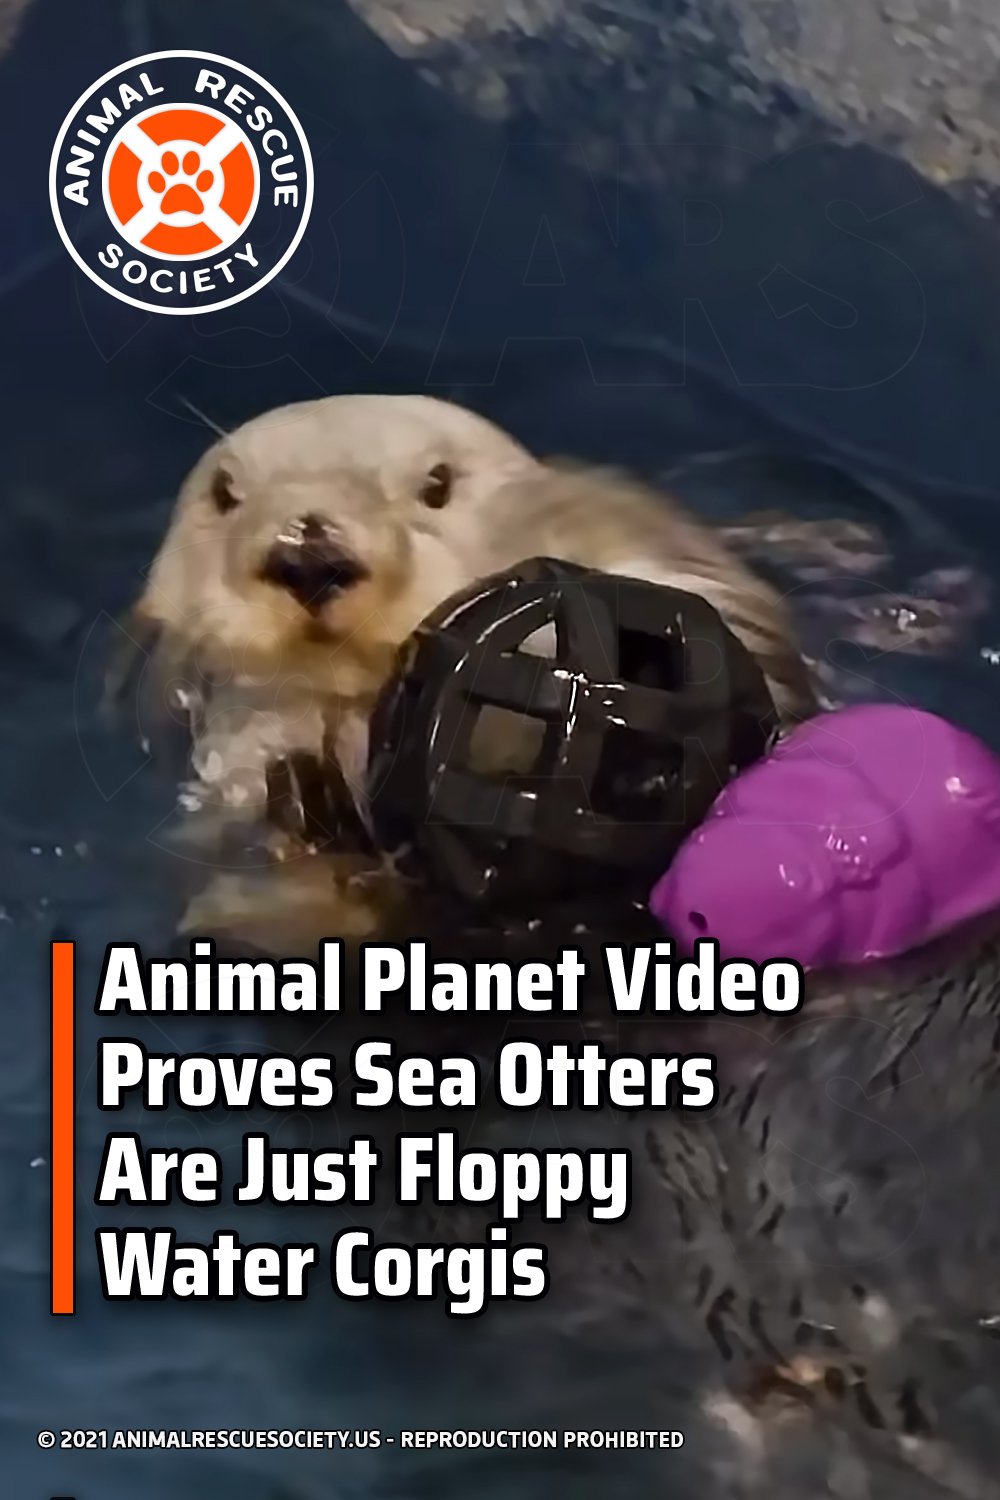 Animal Planet Video Proves Sea Otters Are Just Floppy Water Corgis